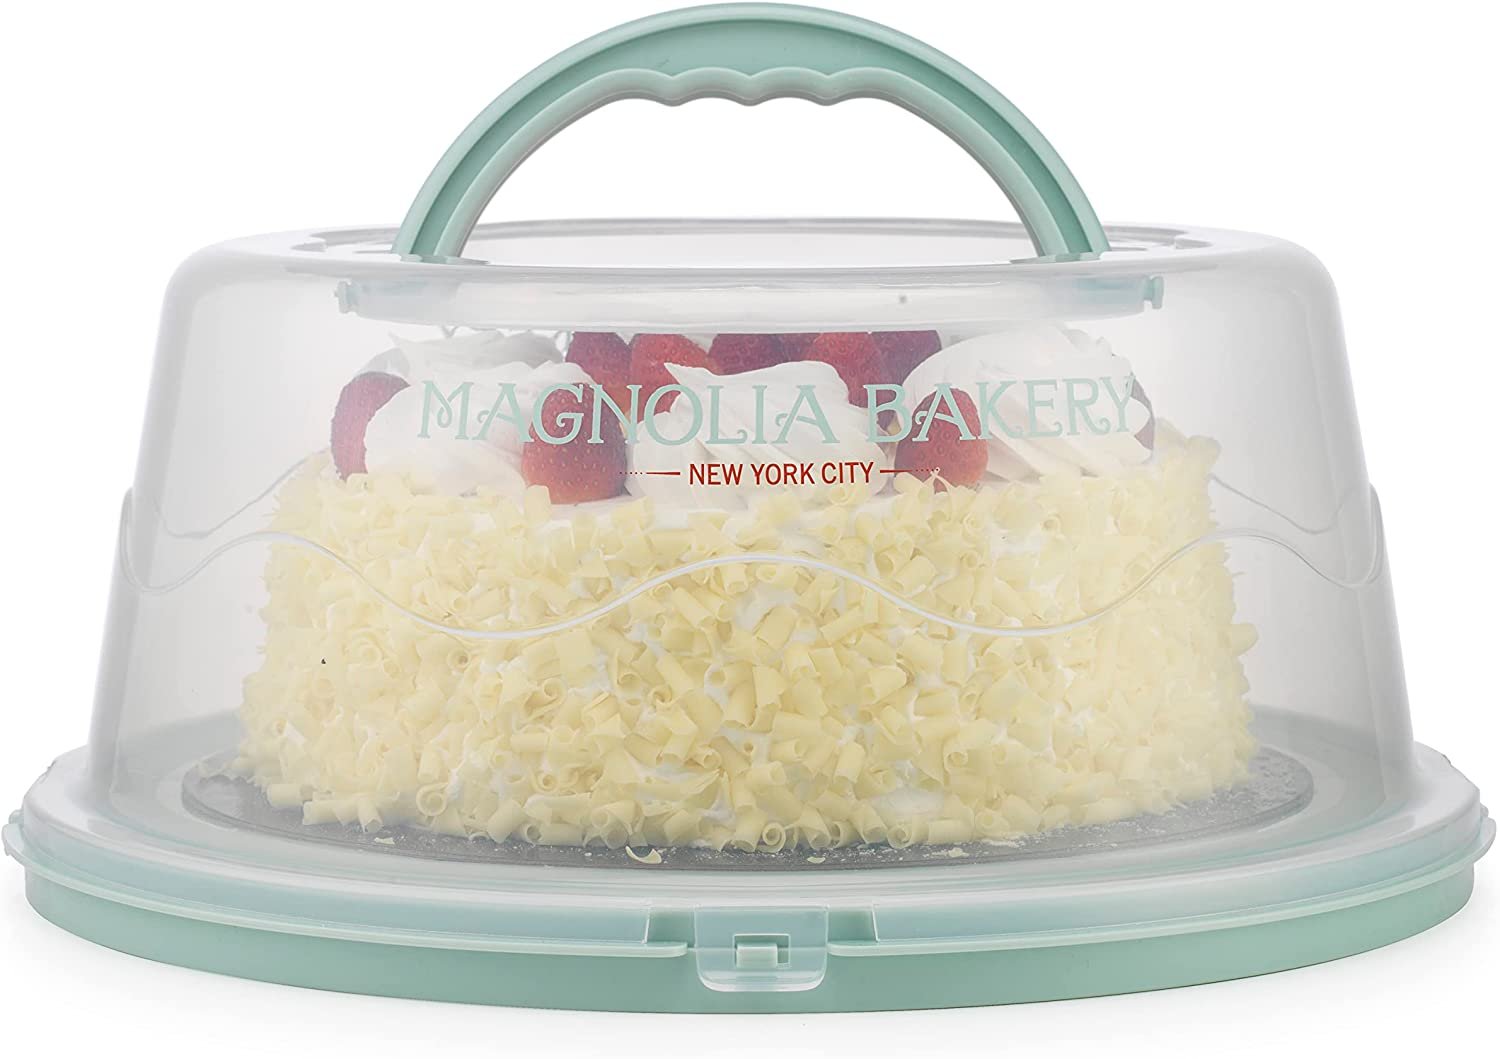 MosJos Round Cake Carrier, BPA-Free Plastic Cake Keeper with Lid, Fits 10” Cakes, Two Secure Side Closures, Dishwasher Safe Cake Transport Container